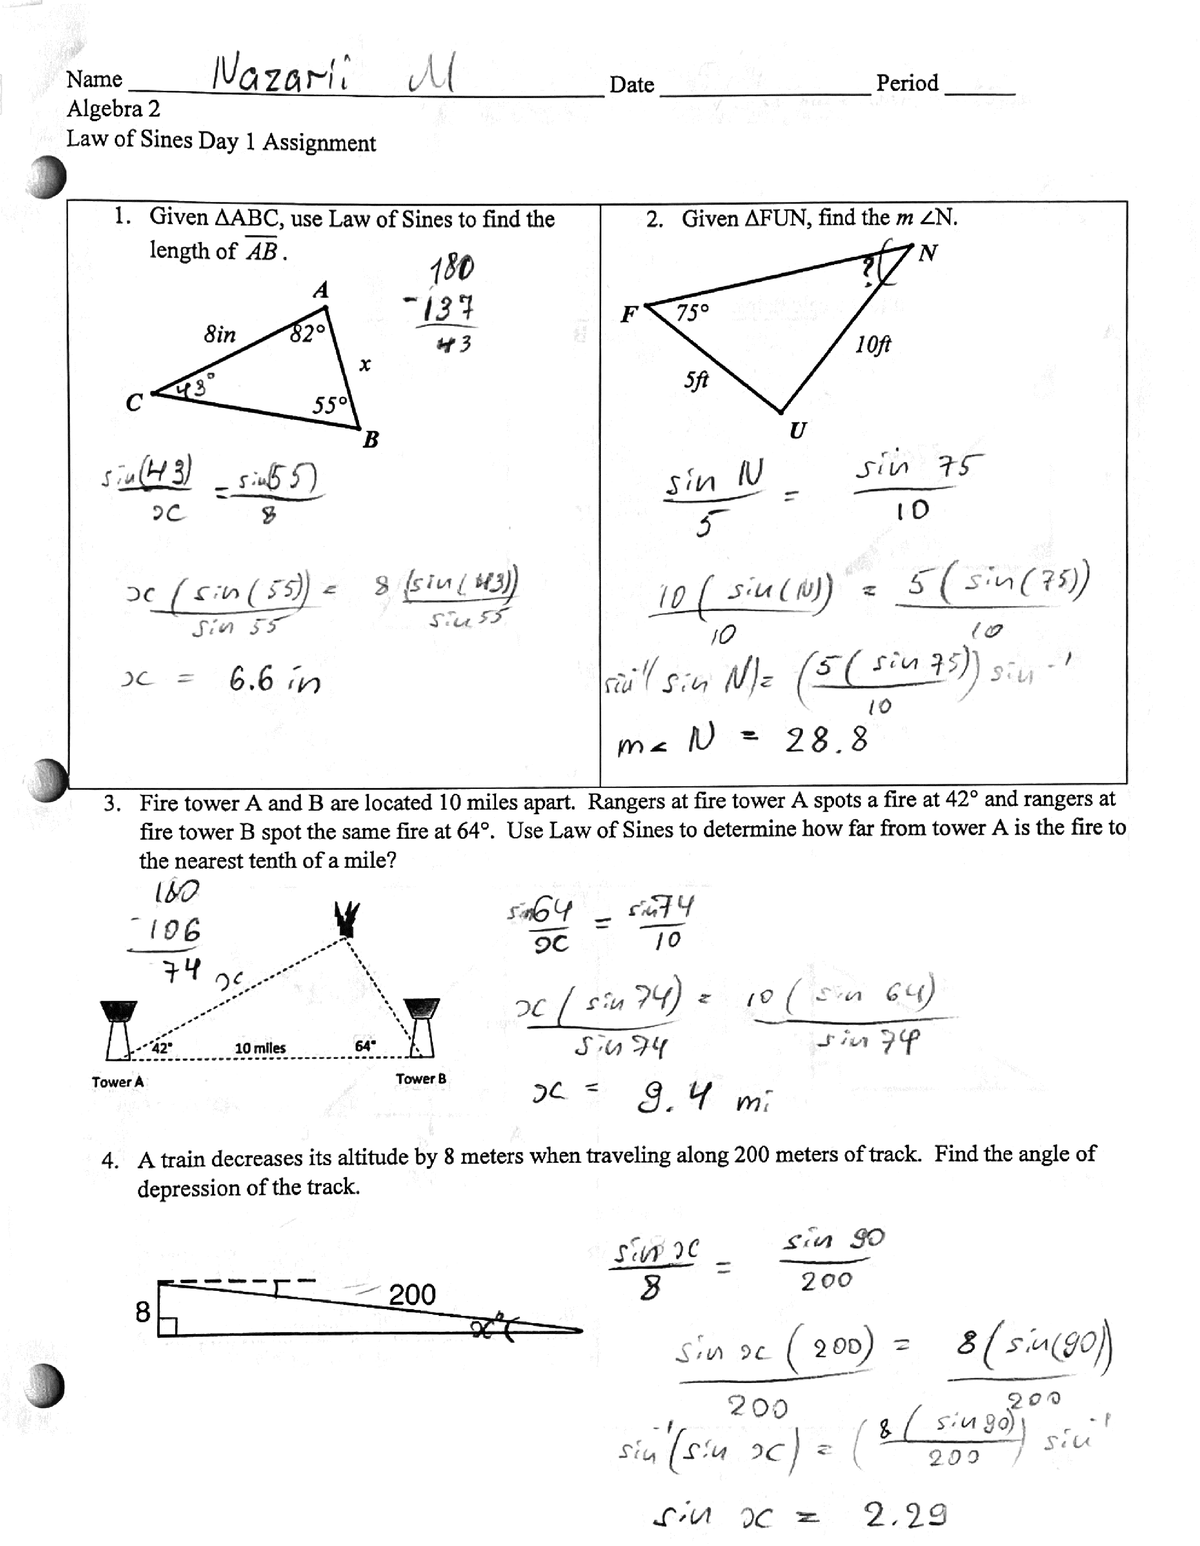 law of sines corrective assignment answers